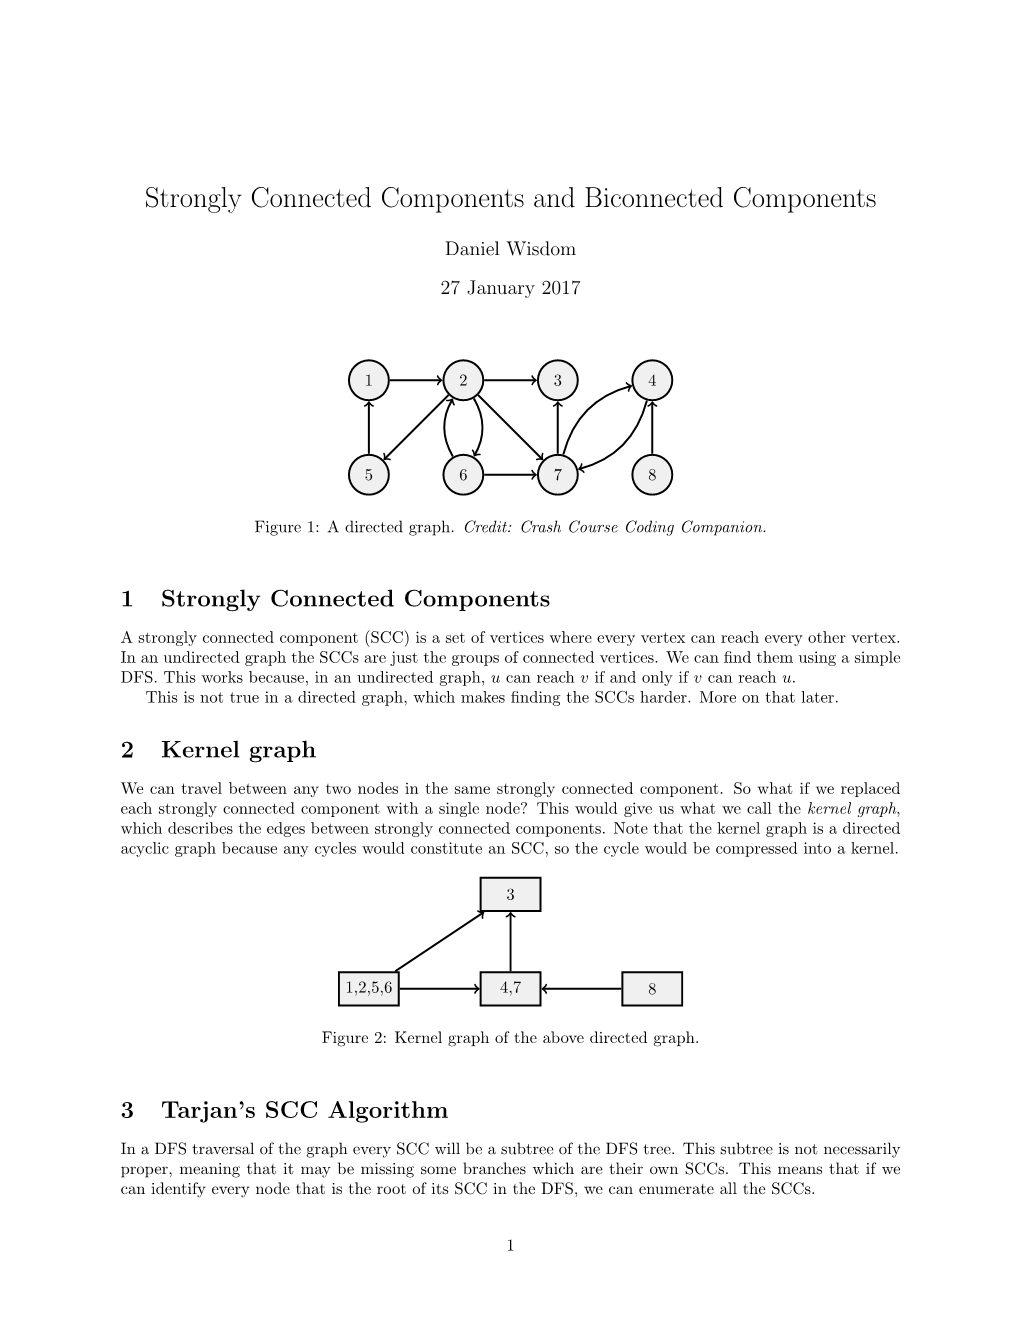 Strongly Connected Components and Biconnected Components